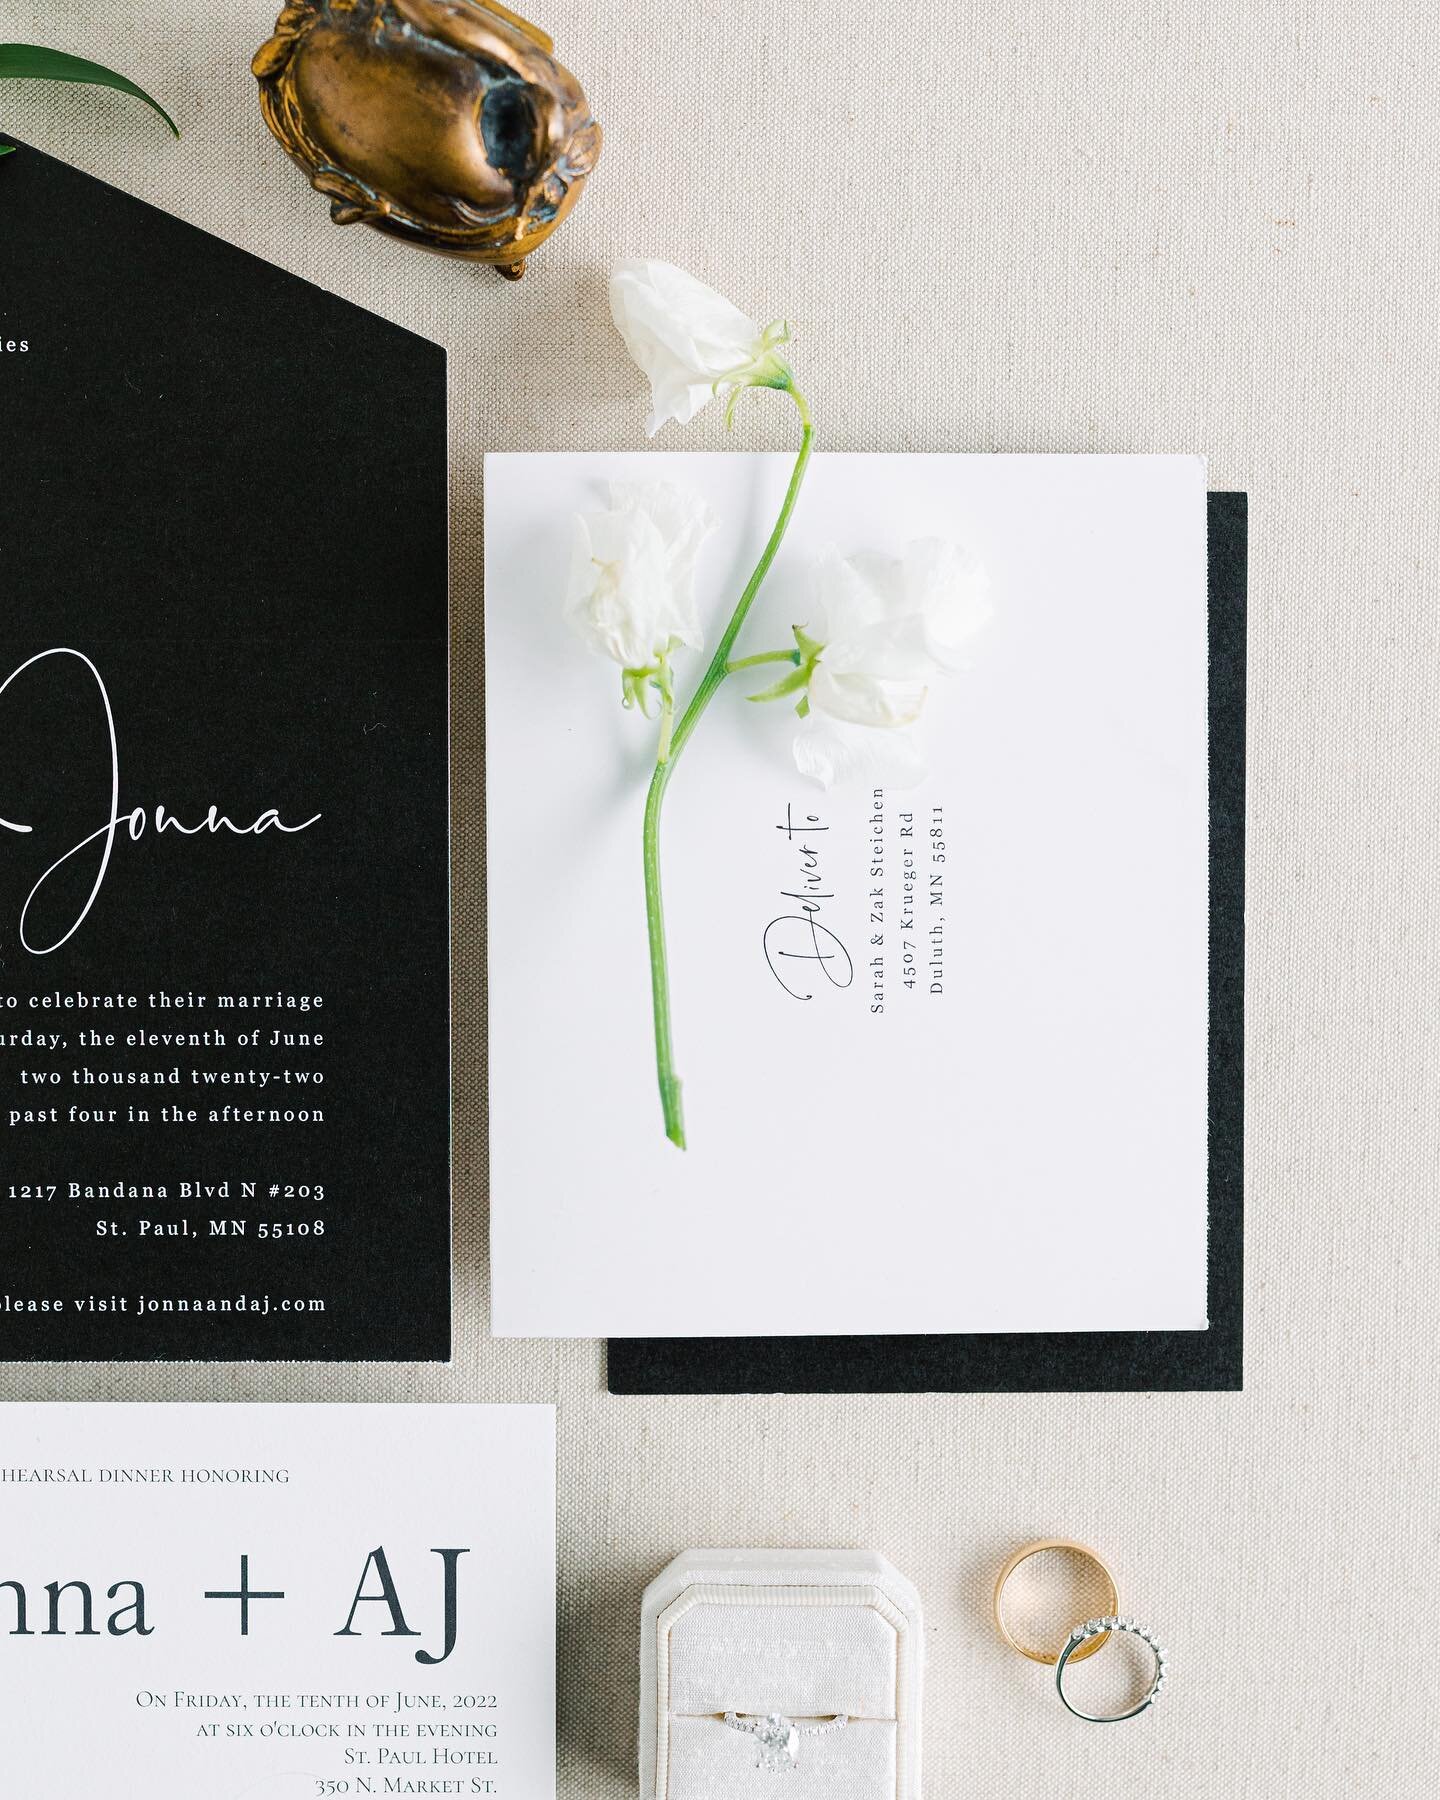 A classy black and white moment with a pop of color🤍🖤

There are so many ways to bring your own personal touch, while sticking with the classics✨

#blackandwhite #weddingtrends #classywedding #mnweddinginspo #minnesotabride